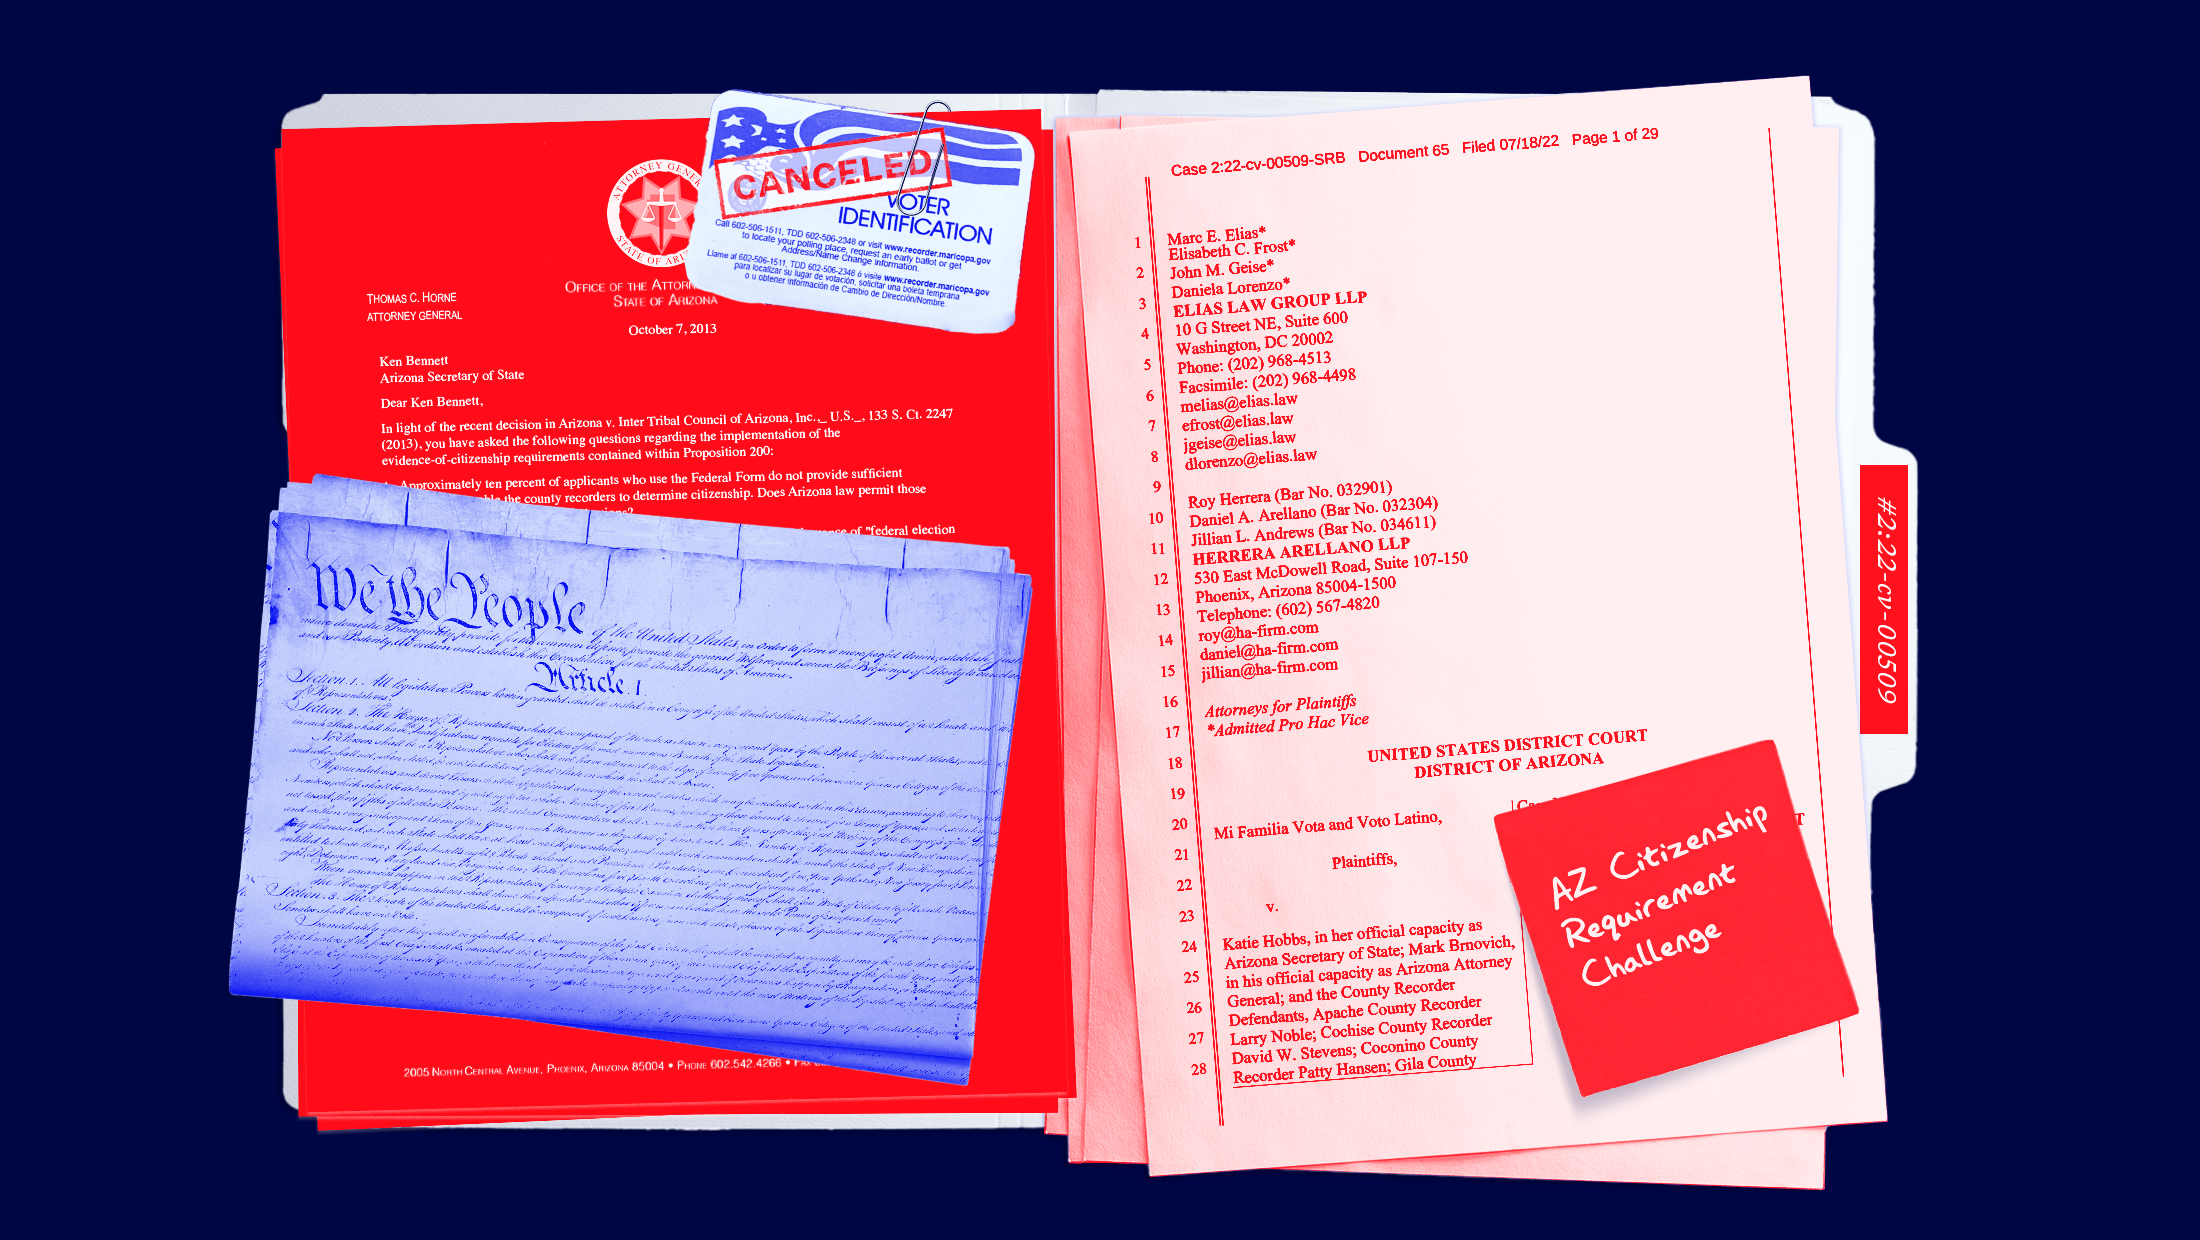 A dark blue background with a manilla folder. On the left side of the manilla folder there is a letter from the Arizona attorney general's office printed on red paper and the U.S. Consitution in blue paper overlays the letter. Attached to the dop of the folder with a paperclip is a voter registration card that is stamped "CANCELED". On the right side of the folder there is a court document and on the bottom right hand corner there is a sticky note that says "AZ Citizenship Requirement Trial"